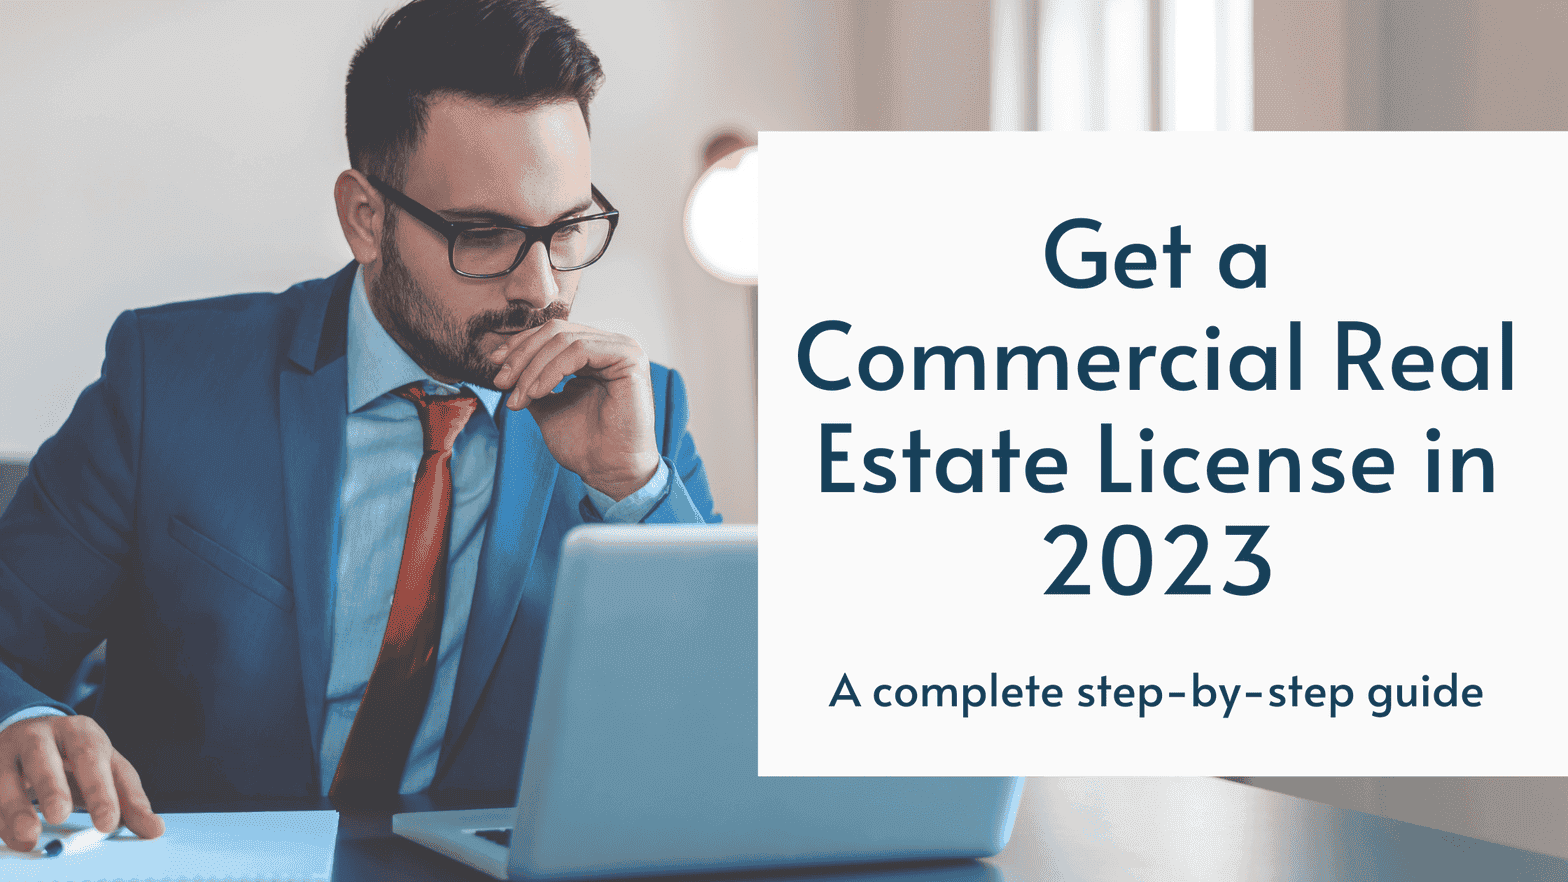 Get a Commercial Real Estate License in 2023 – a Complete Step-by Step Guide